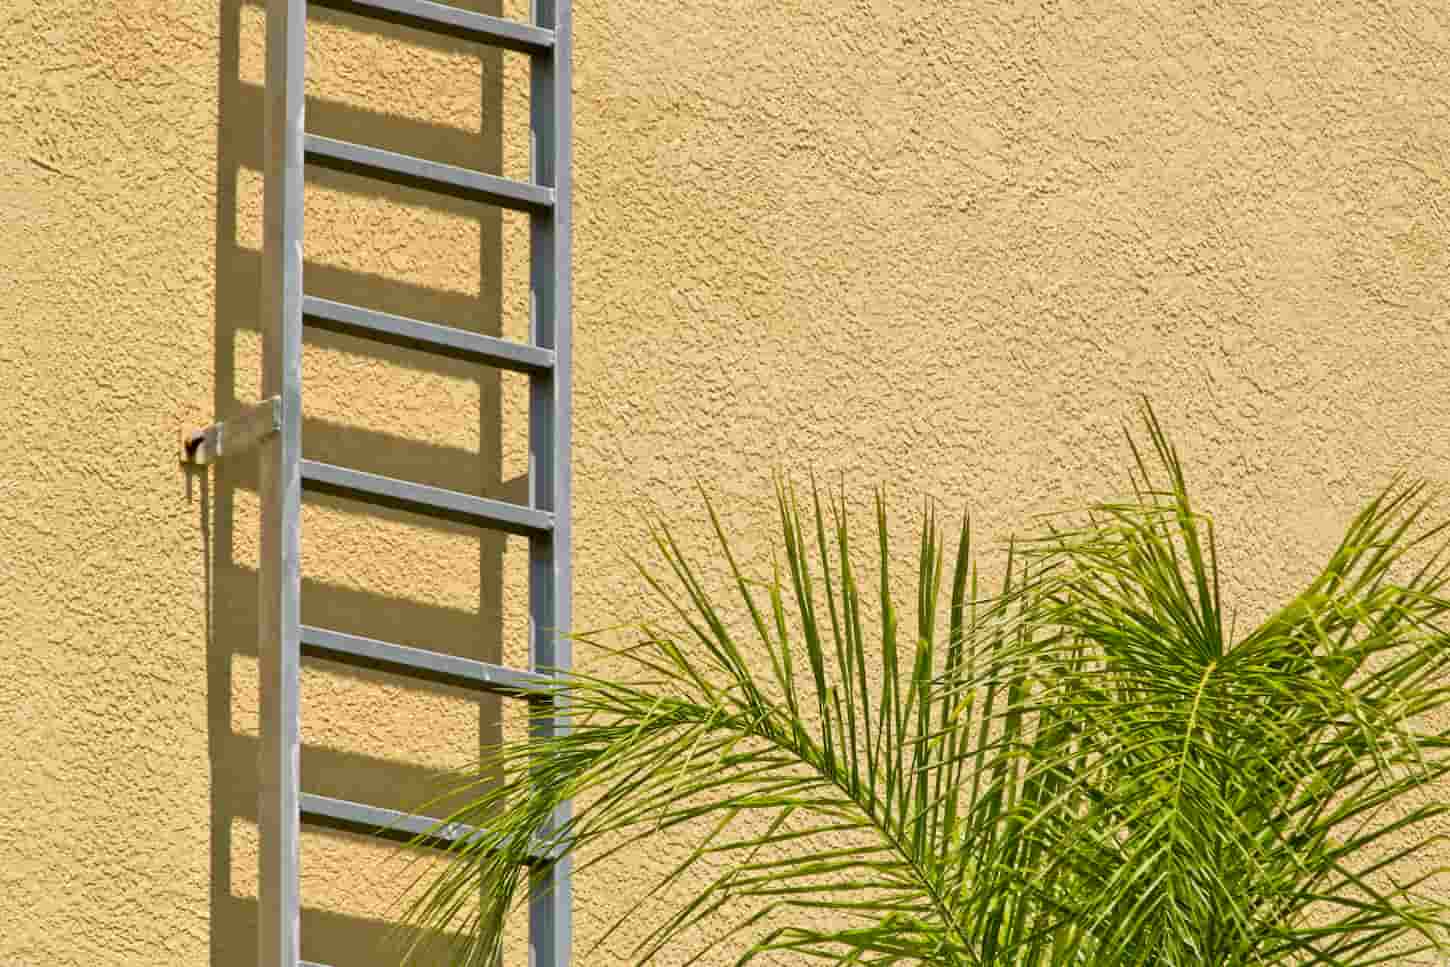 An image of a Minimalist view of a yellow stucco wall with a metal fire escape ladder going up the side along with some palm fronds.